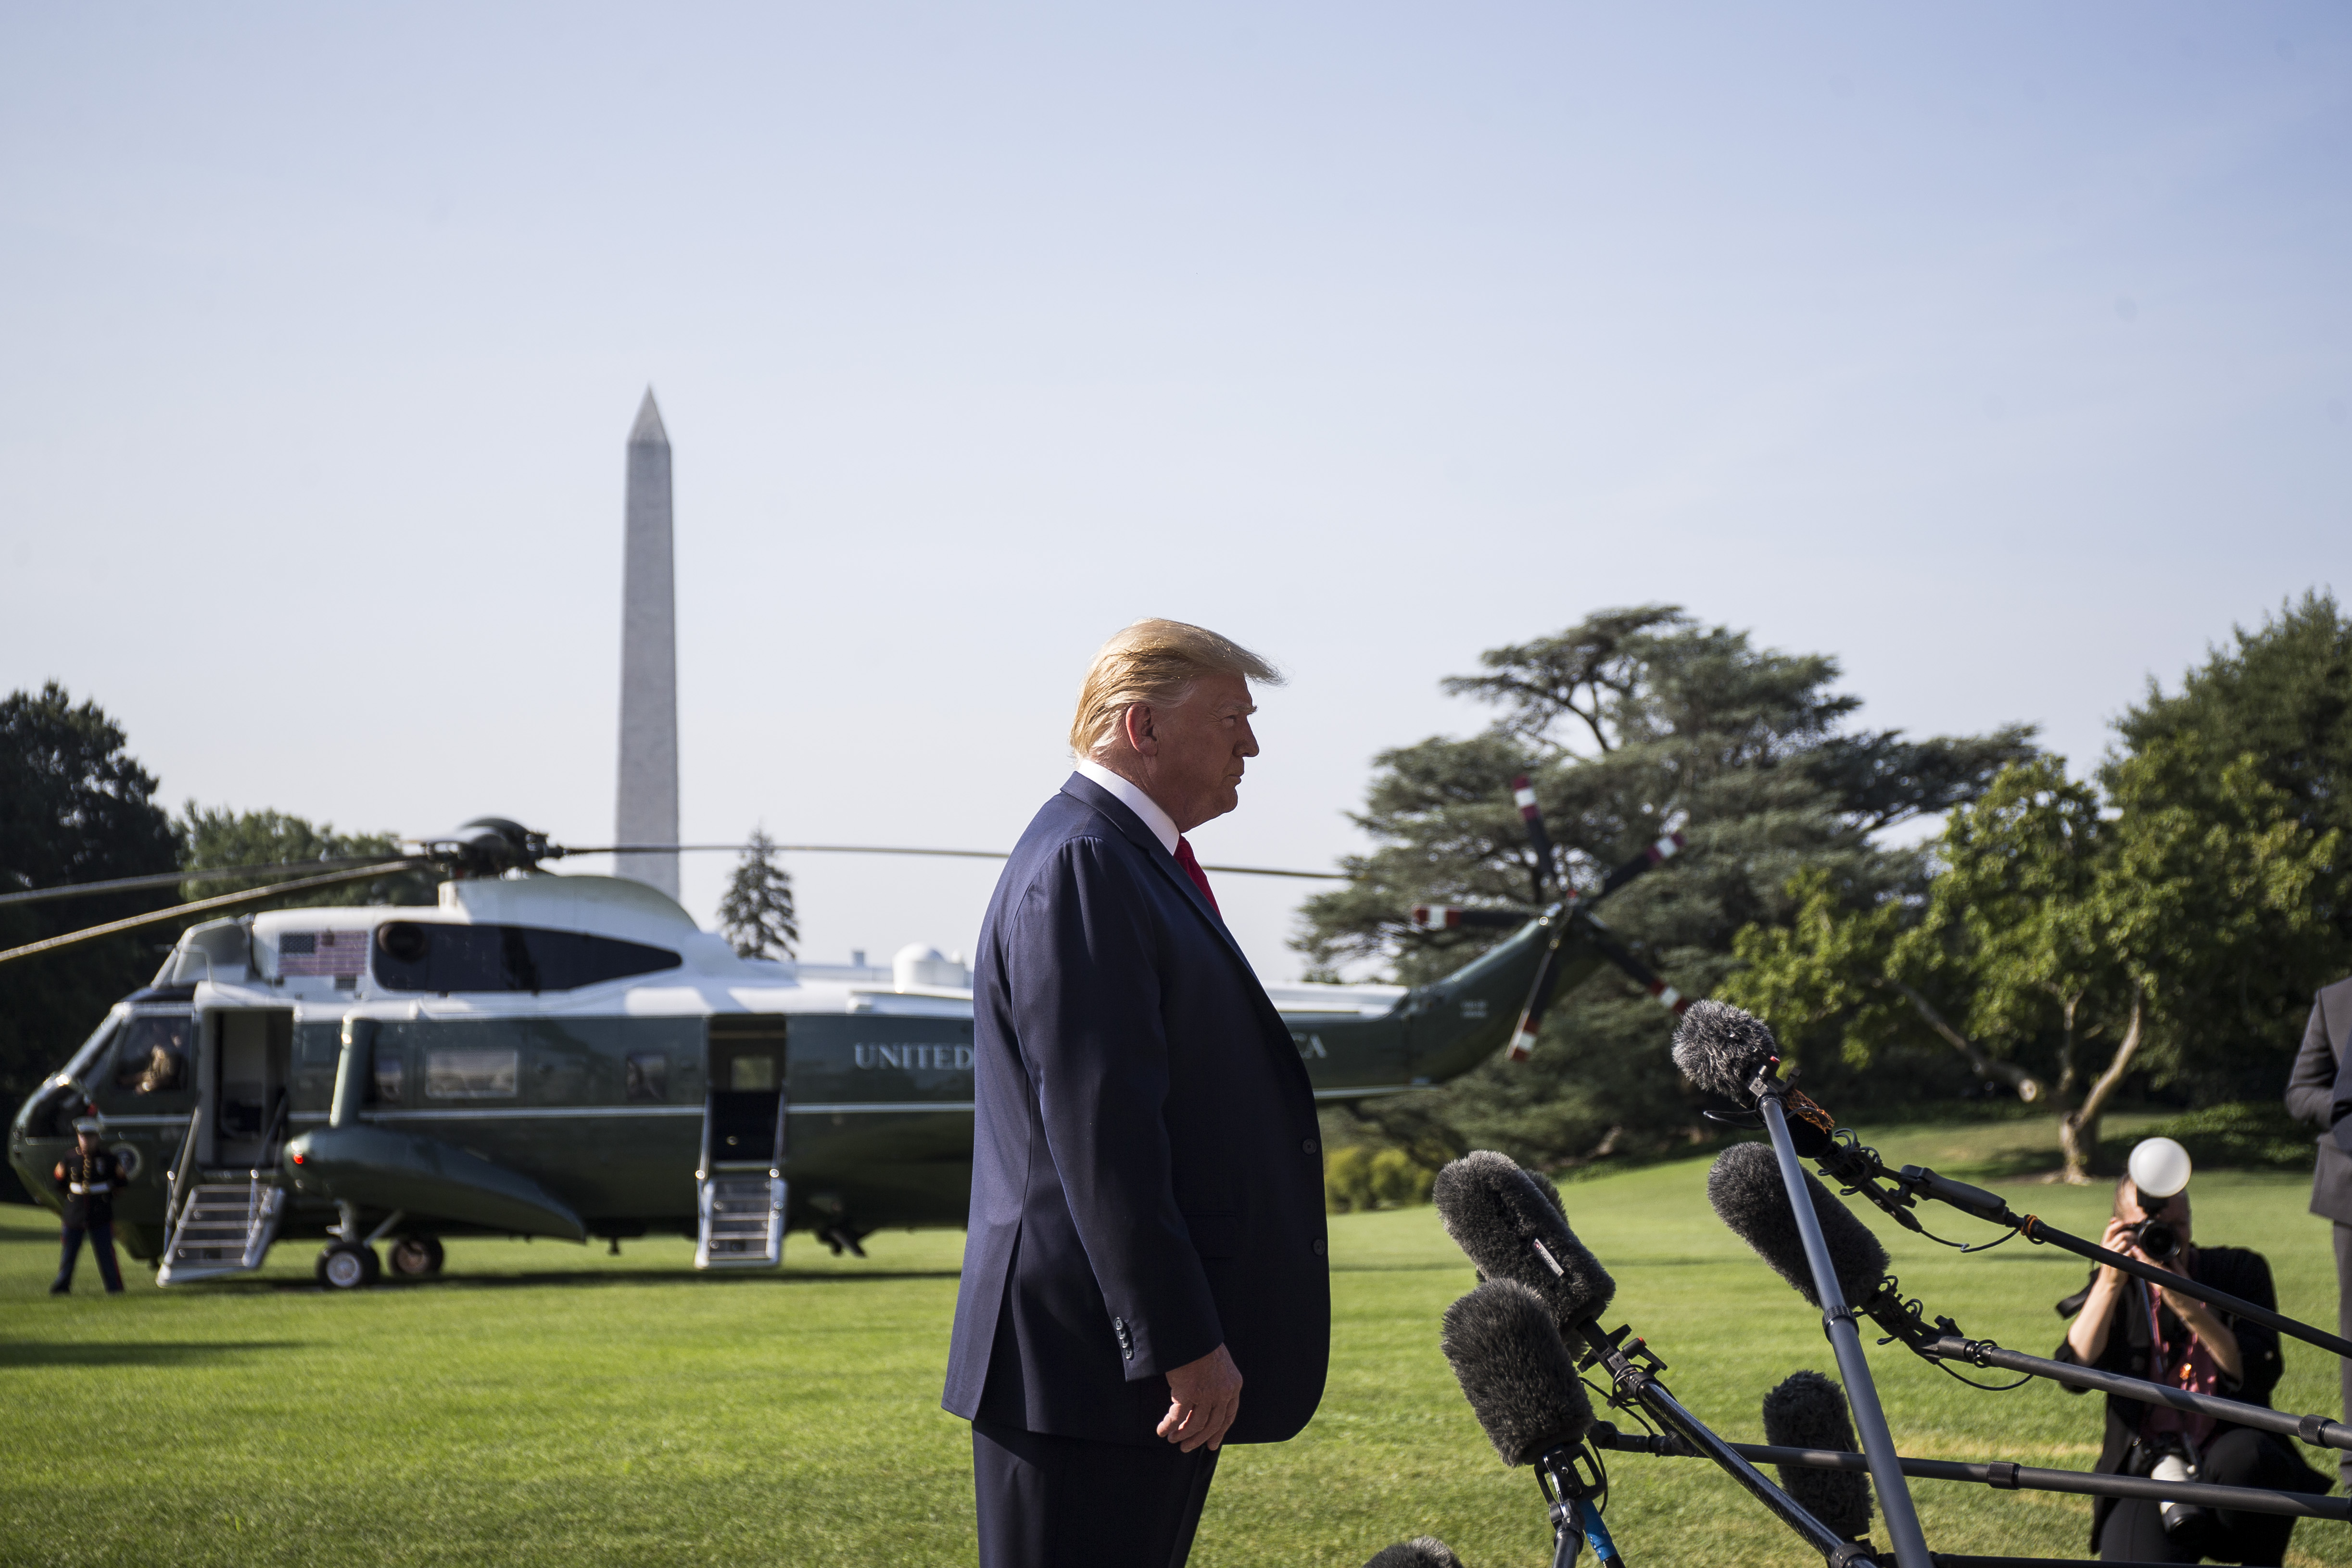 WASHINGTON, DC - AUGUST 07: President Donald Trump speaks to members of the press before departing from the White House en route to Dayton, Ohio and El Paso, Texas on August 7, 2019 in Washin